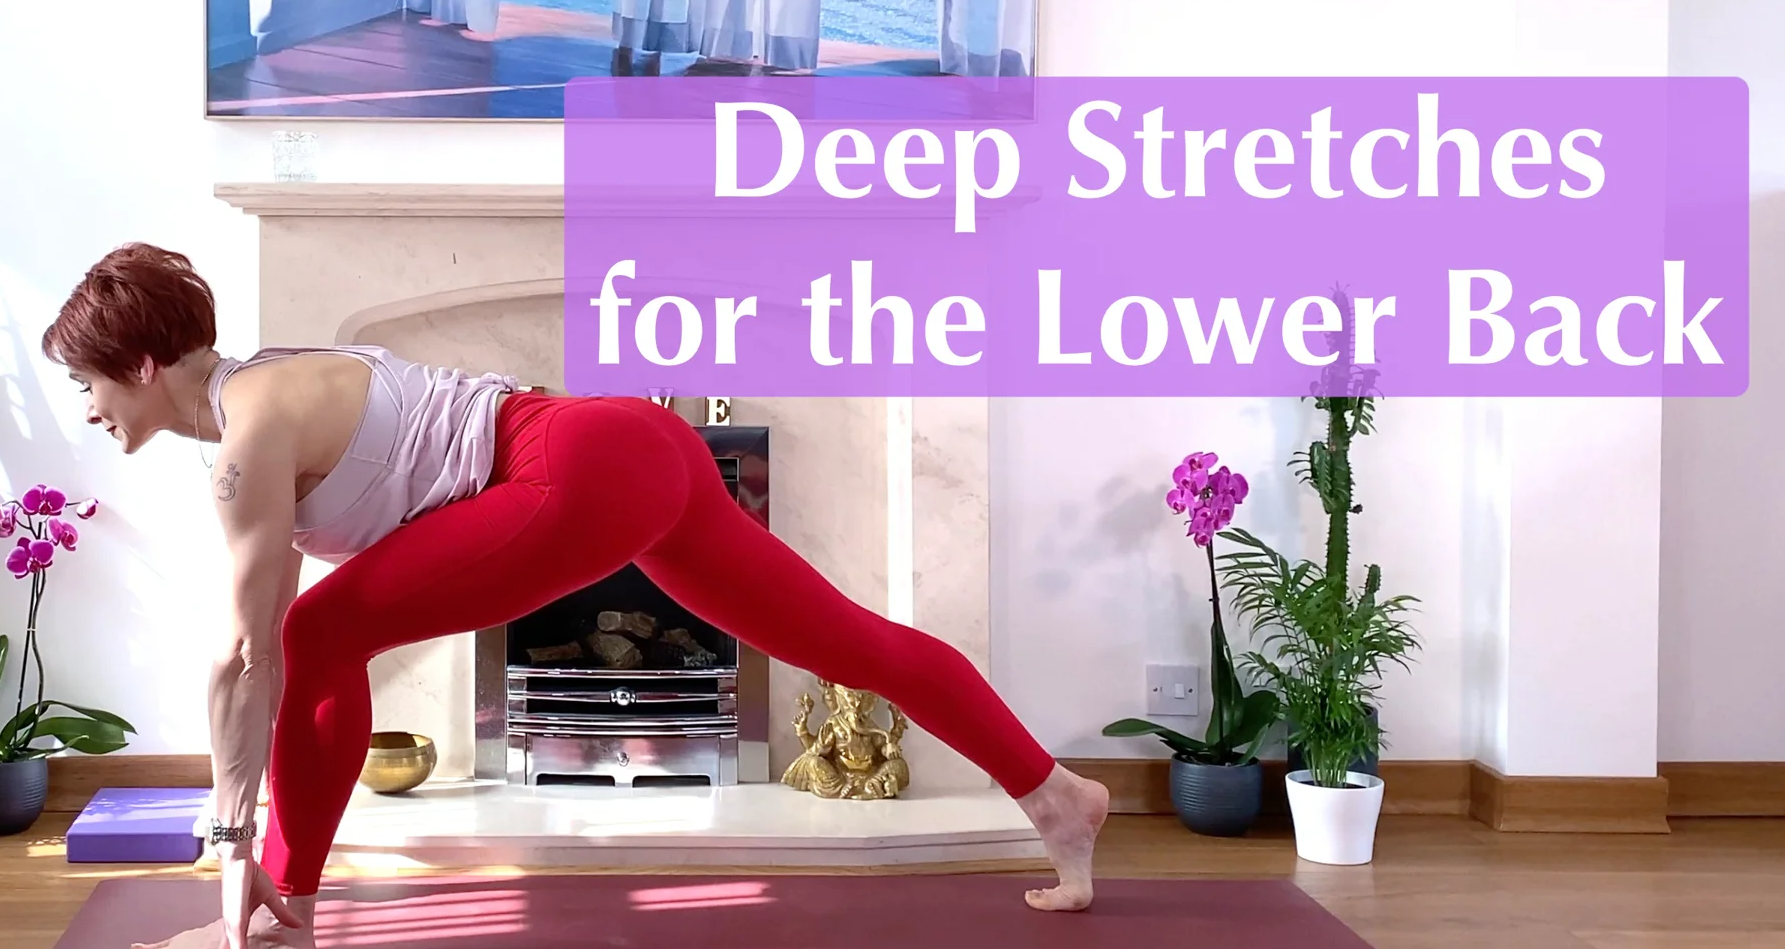 Olga Oakenfold - Deep Stretches for the Lower Back